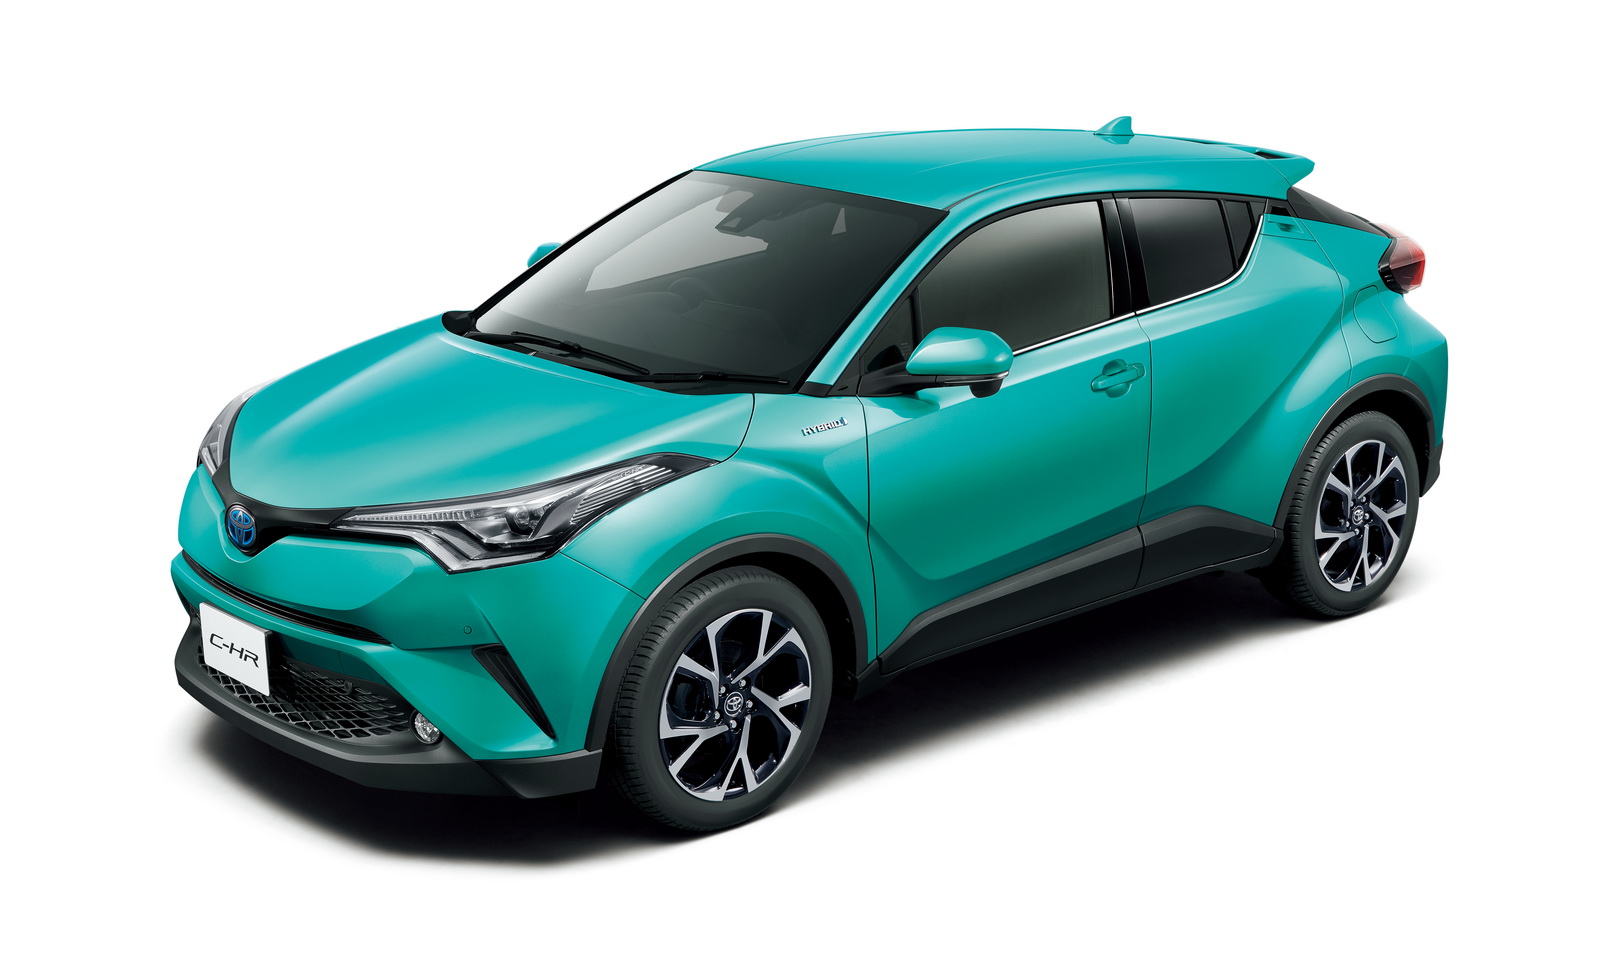 Toyota C-HR Range Grows In Japan With Safety-Focused Variants